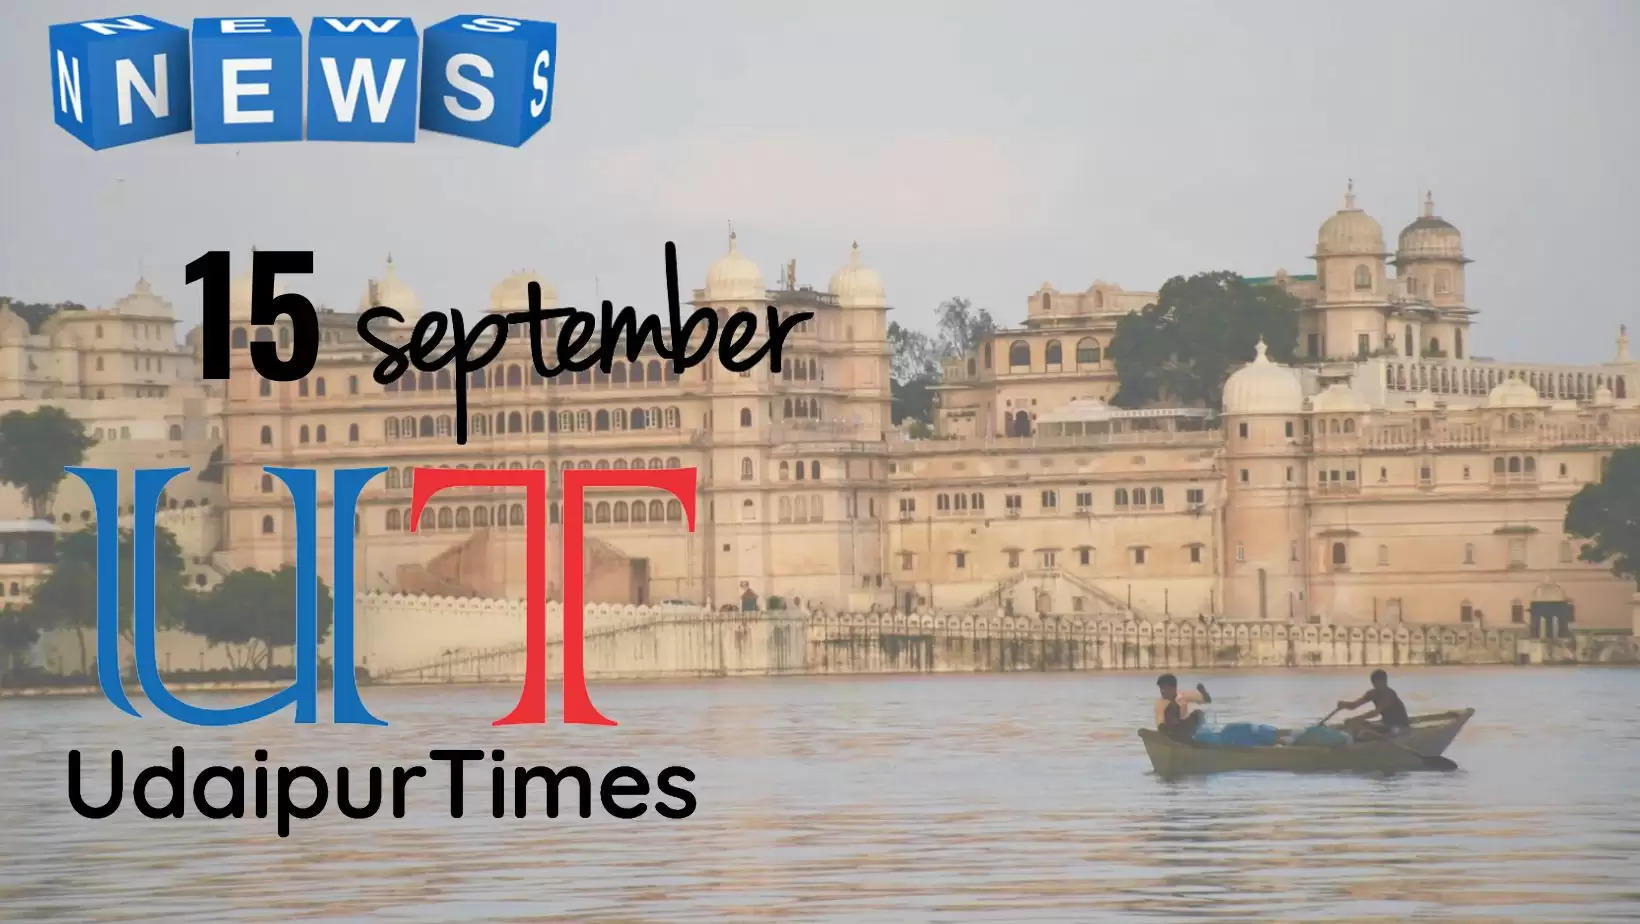 Latest News from Udaipur, Latest News  from  Chittor, Latest News from  Banswara, Latest News from  Rajsamand, Latest News from Dungarpur, Latest News from Bhilwara, Latest News from Bhilwara, Latest News from Pratapgarh, Latest News from Salumber